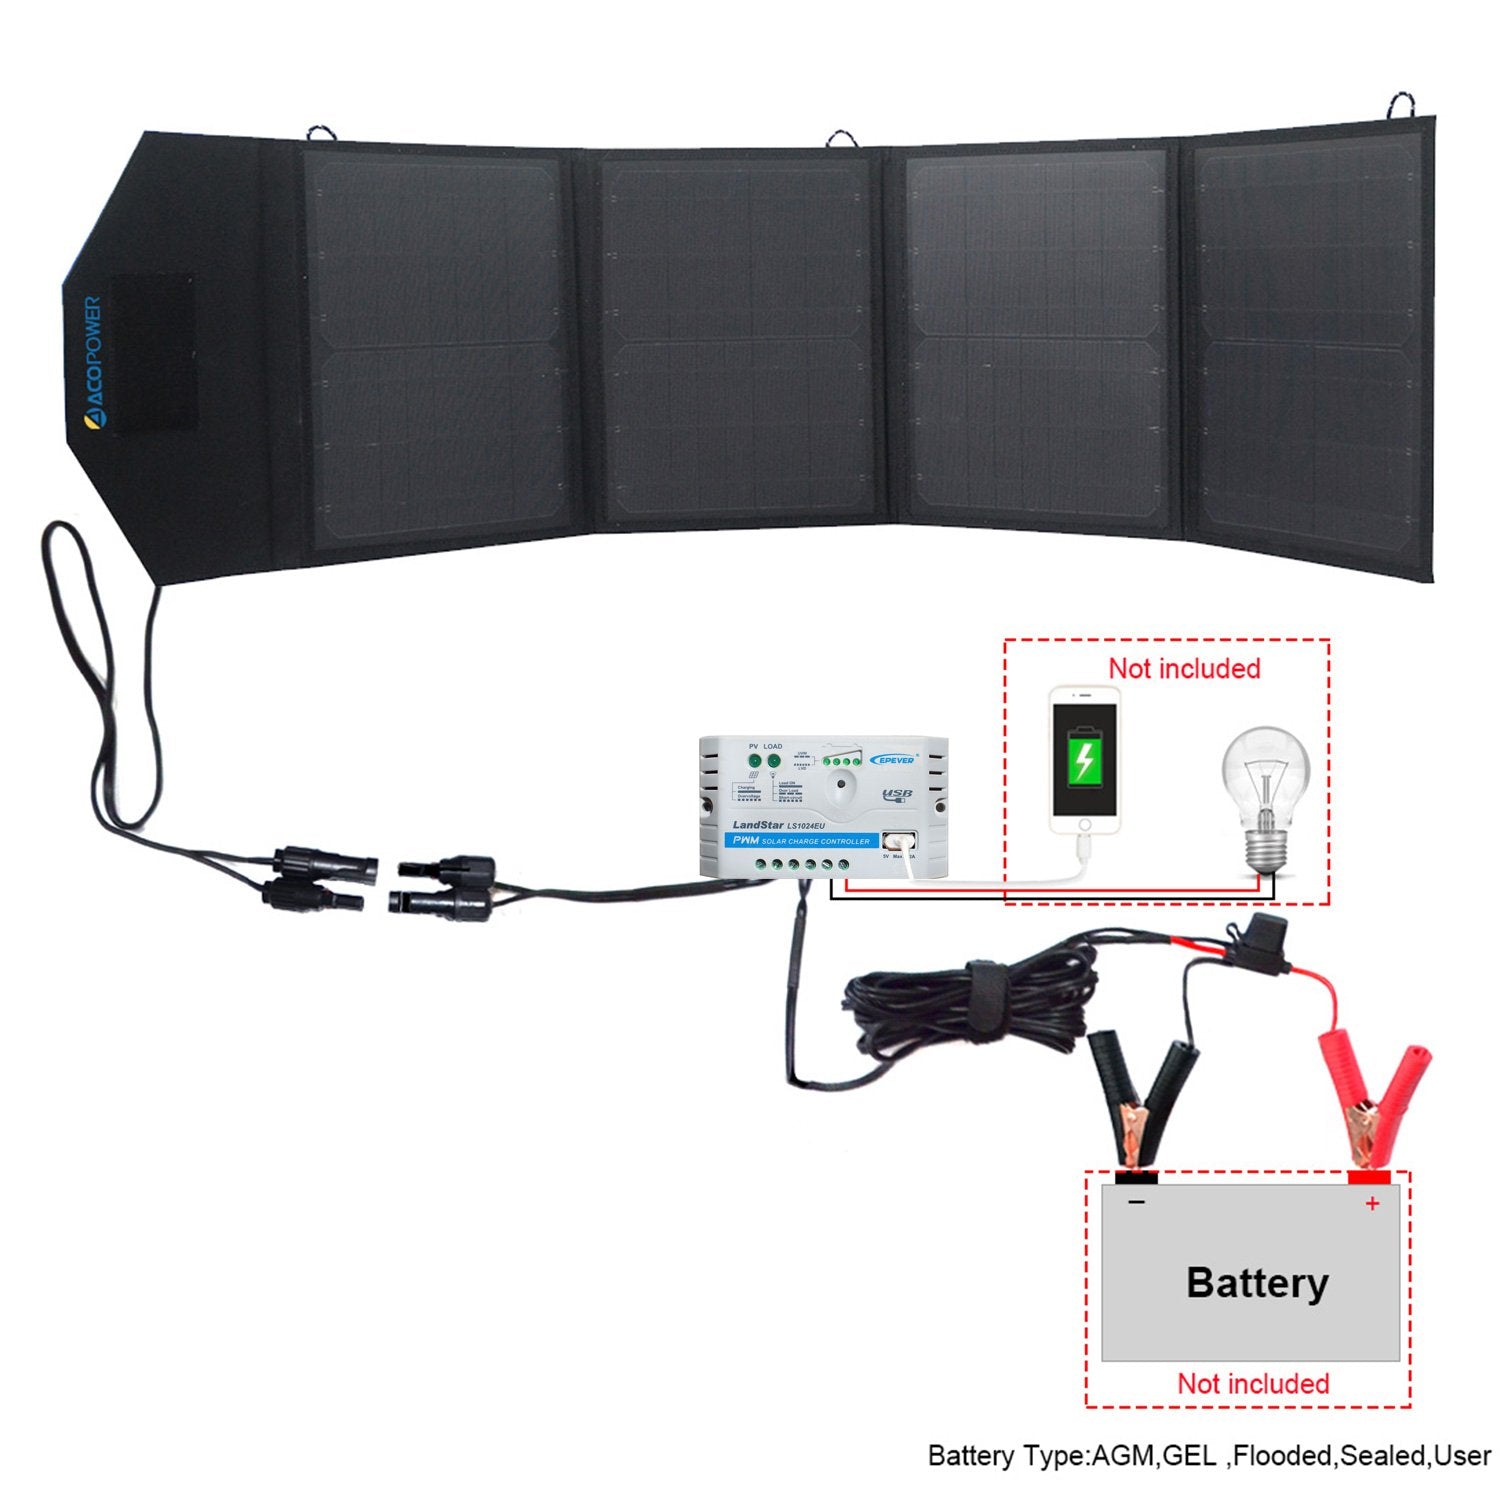 50 WATT, 12 Volt Foldable/Portable Solar Panel Suitcase Kit with 5 Amp PWM Solar Charge Controller